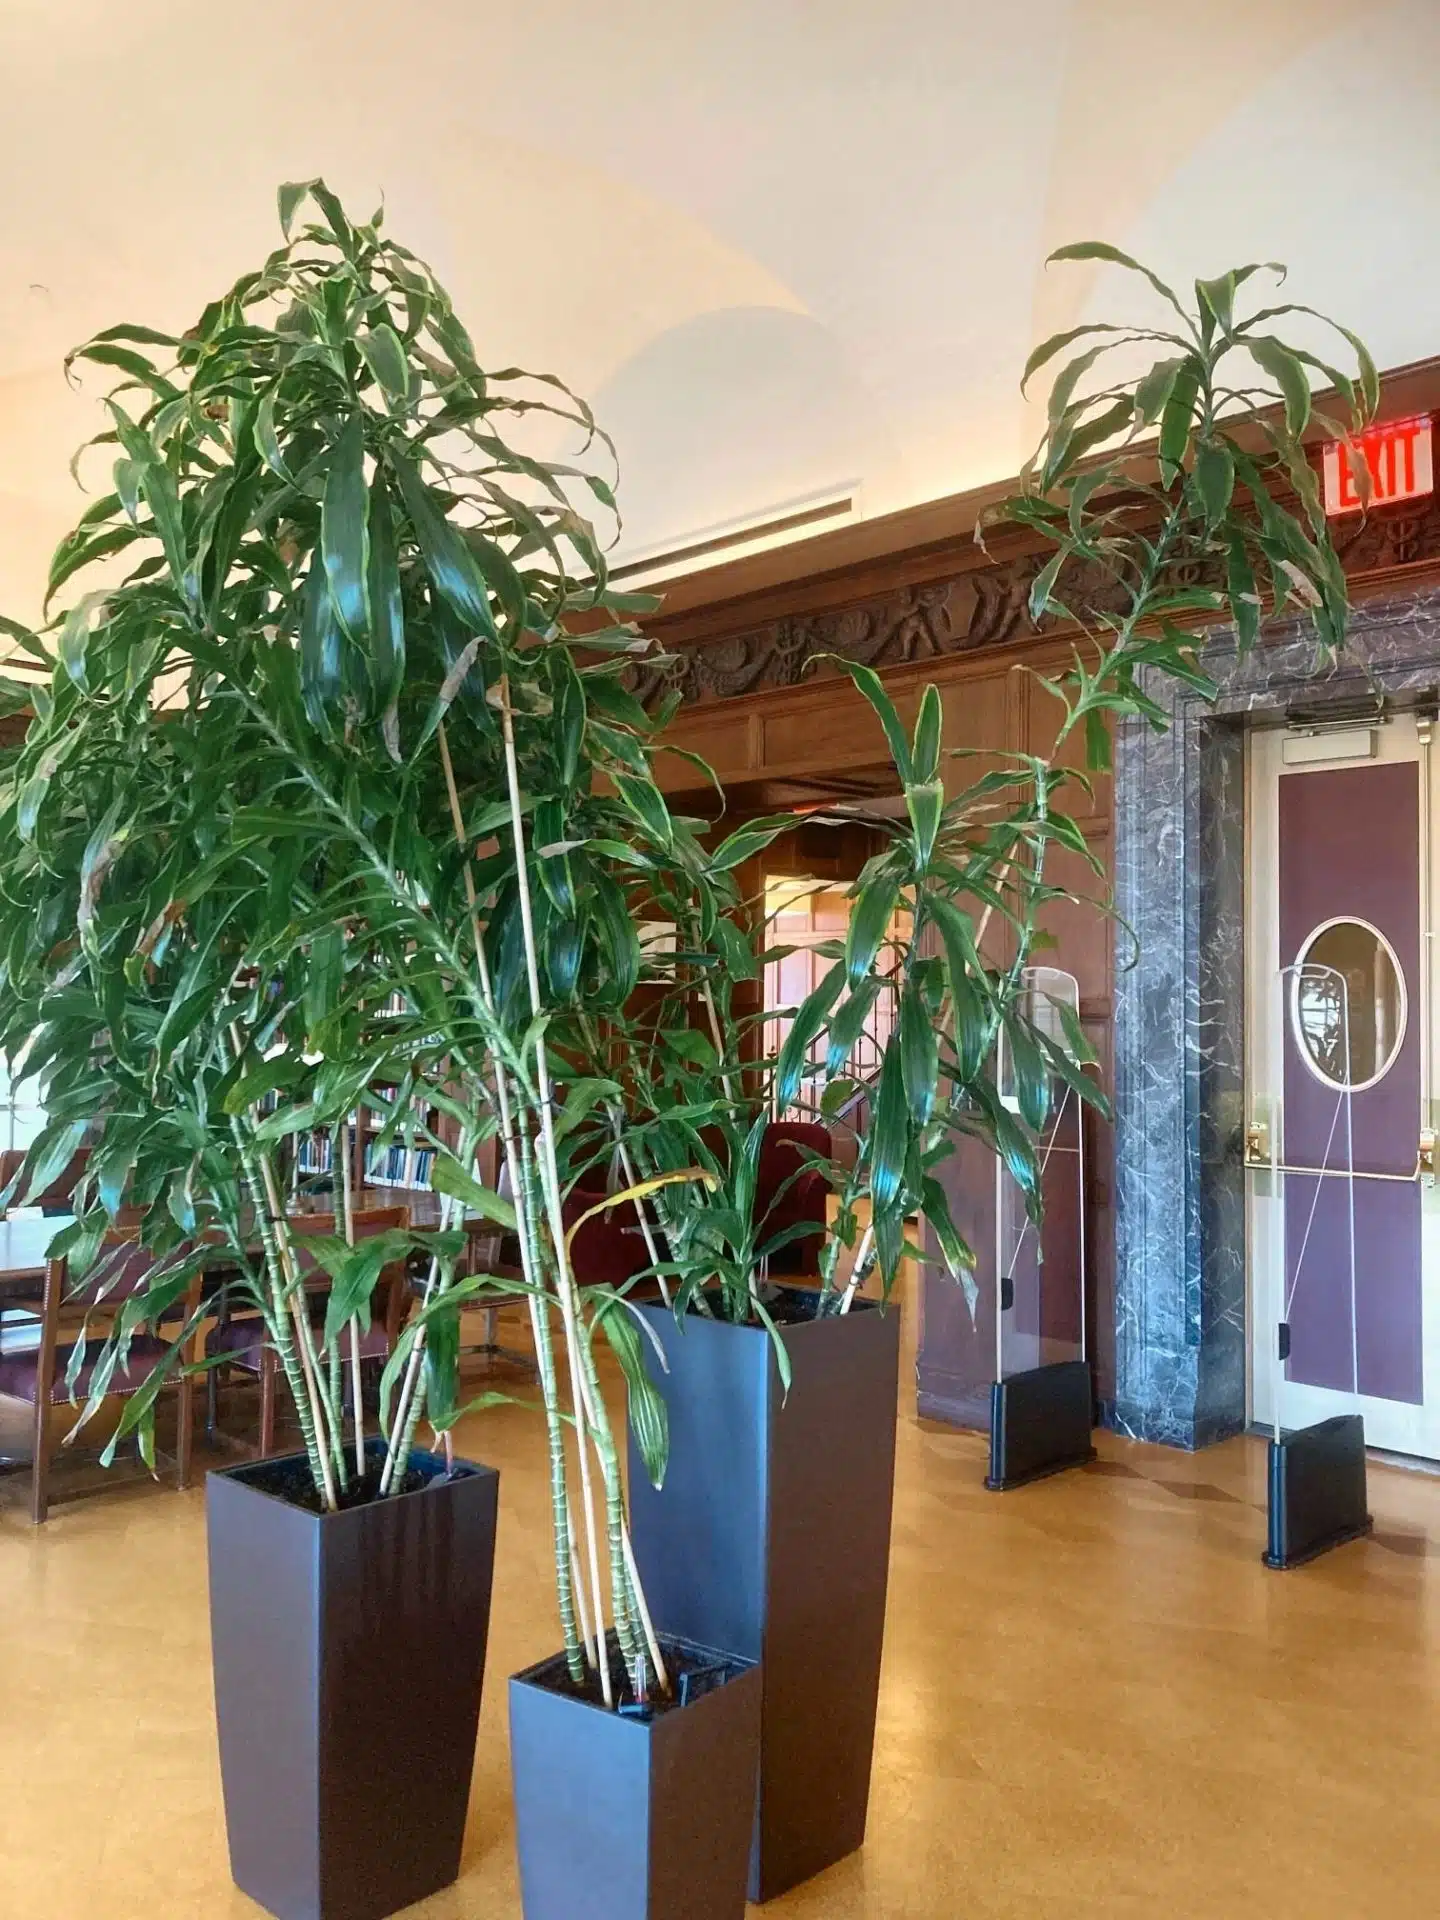 Image of overgrown plants that need pruning in a library